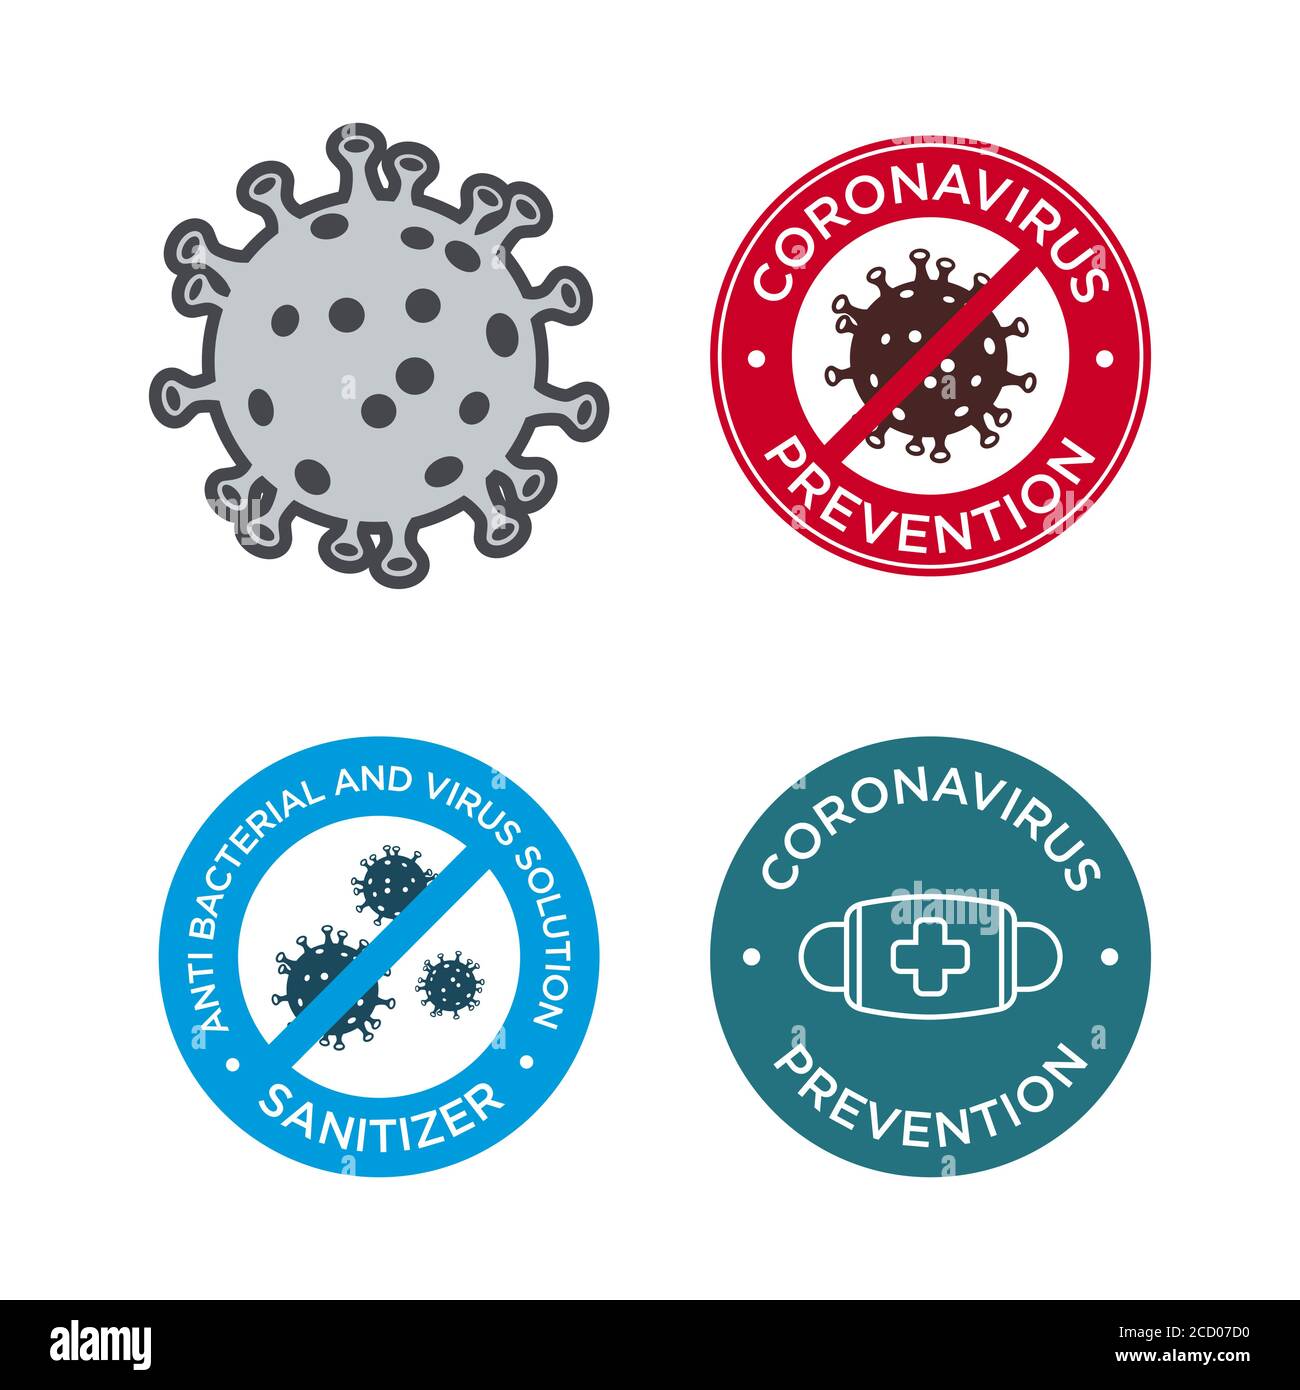 Coronavirus prevention icon set. MERS-Cov (Middle East Respiratory Coronavirus Syndrome), (2019-nCoV). Design for protection against a viral pandemic. Stock Vector